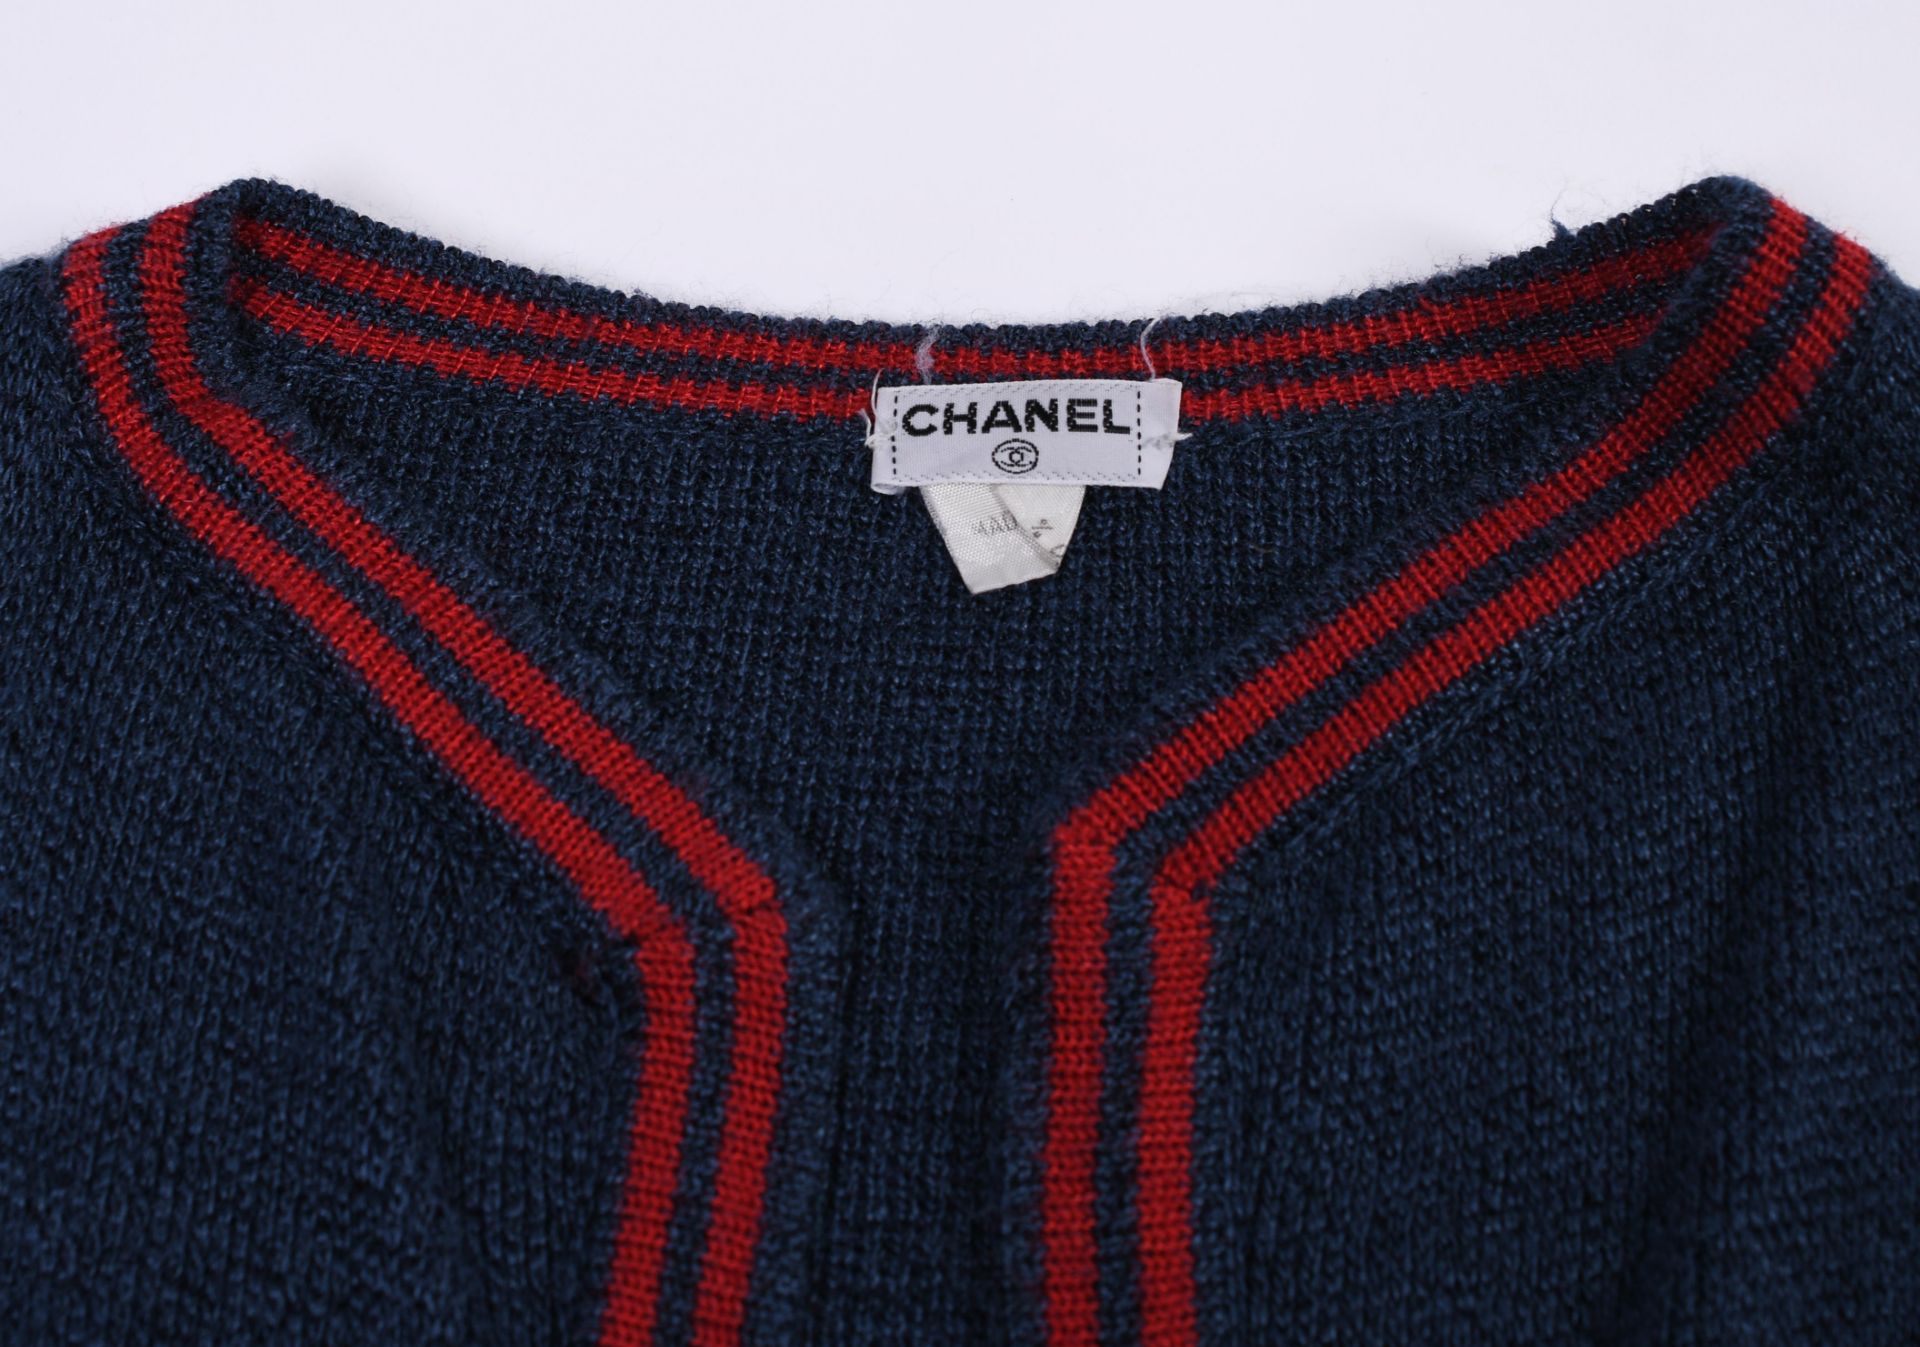 Chanel, - Image 3 of 7